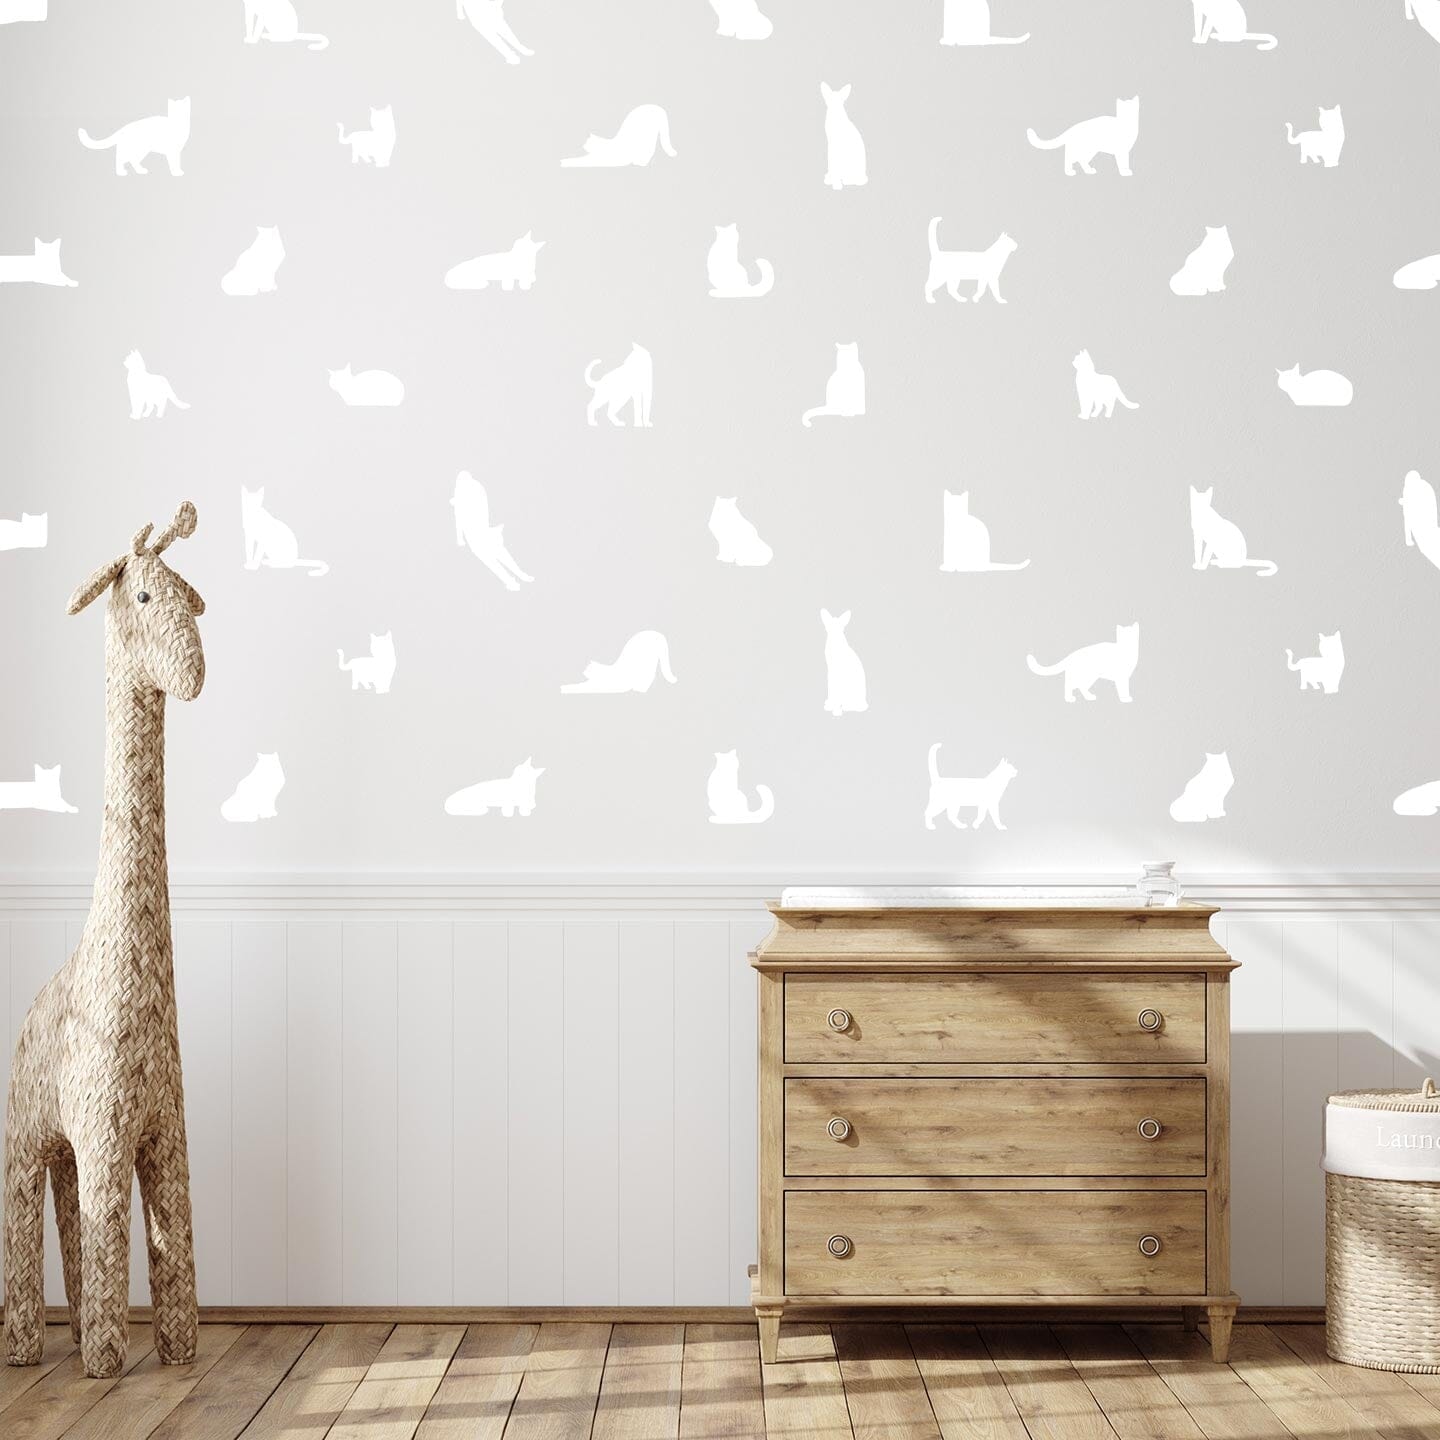 Cat Silhouette Wall Decals Decals Urbanwalls White 